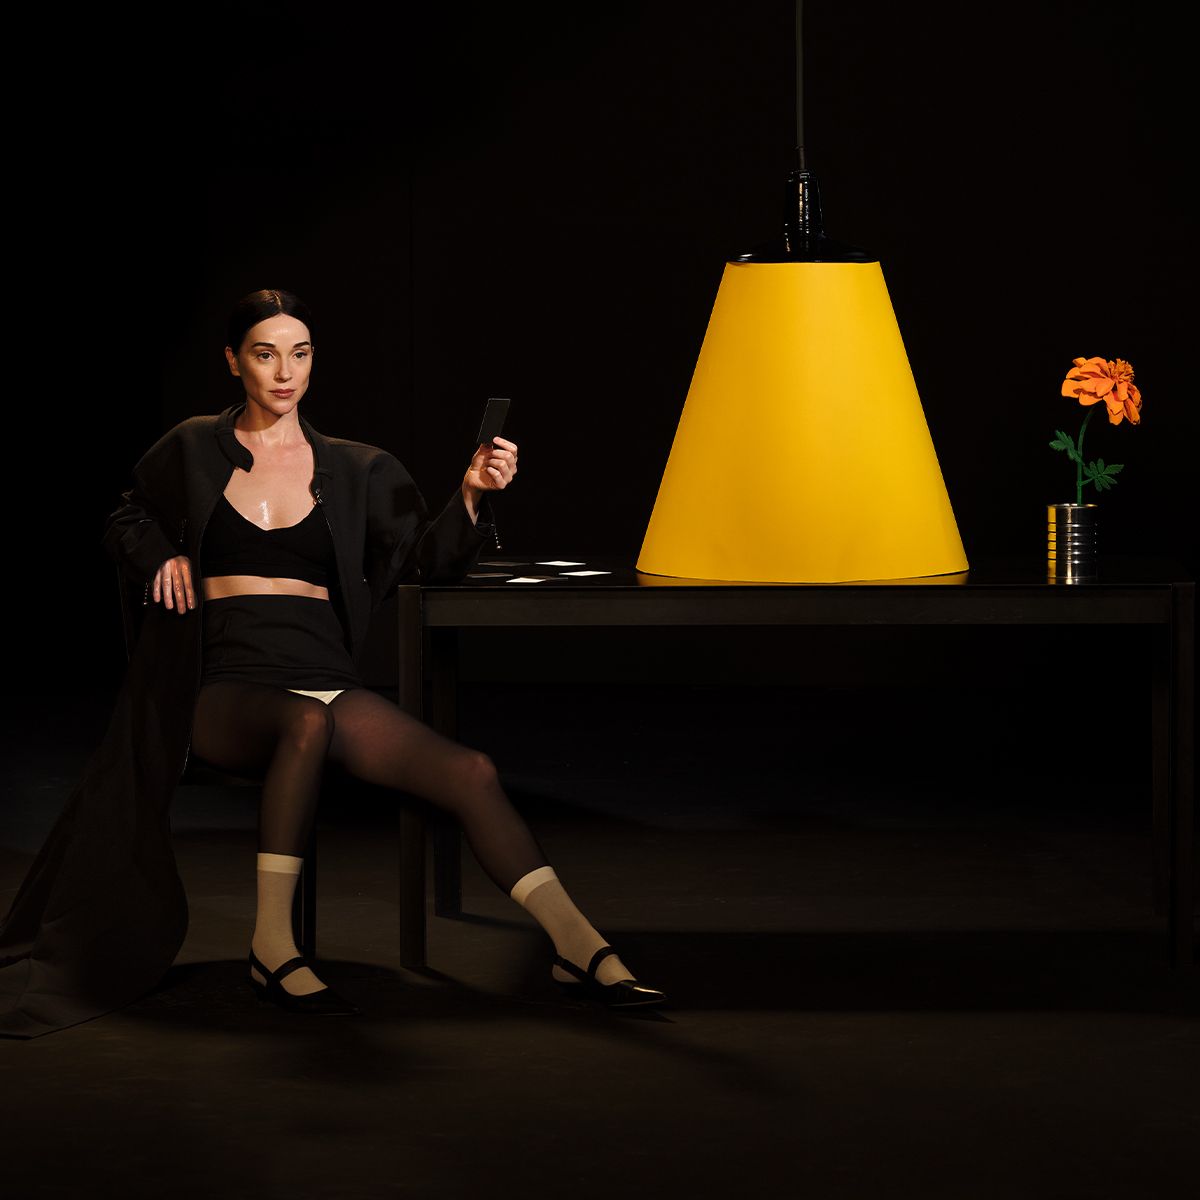 St. Vincent Isn't Wasting Any Time With Her Latest Album